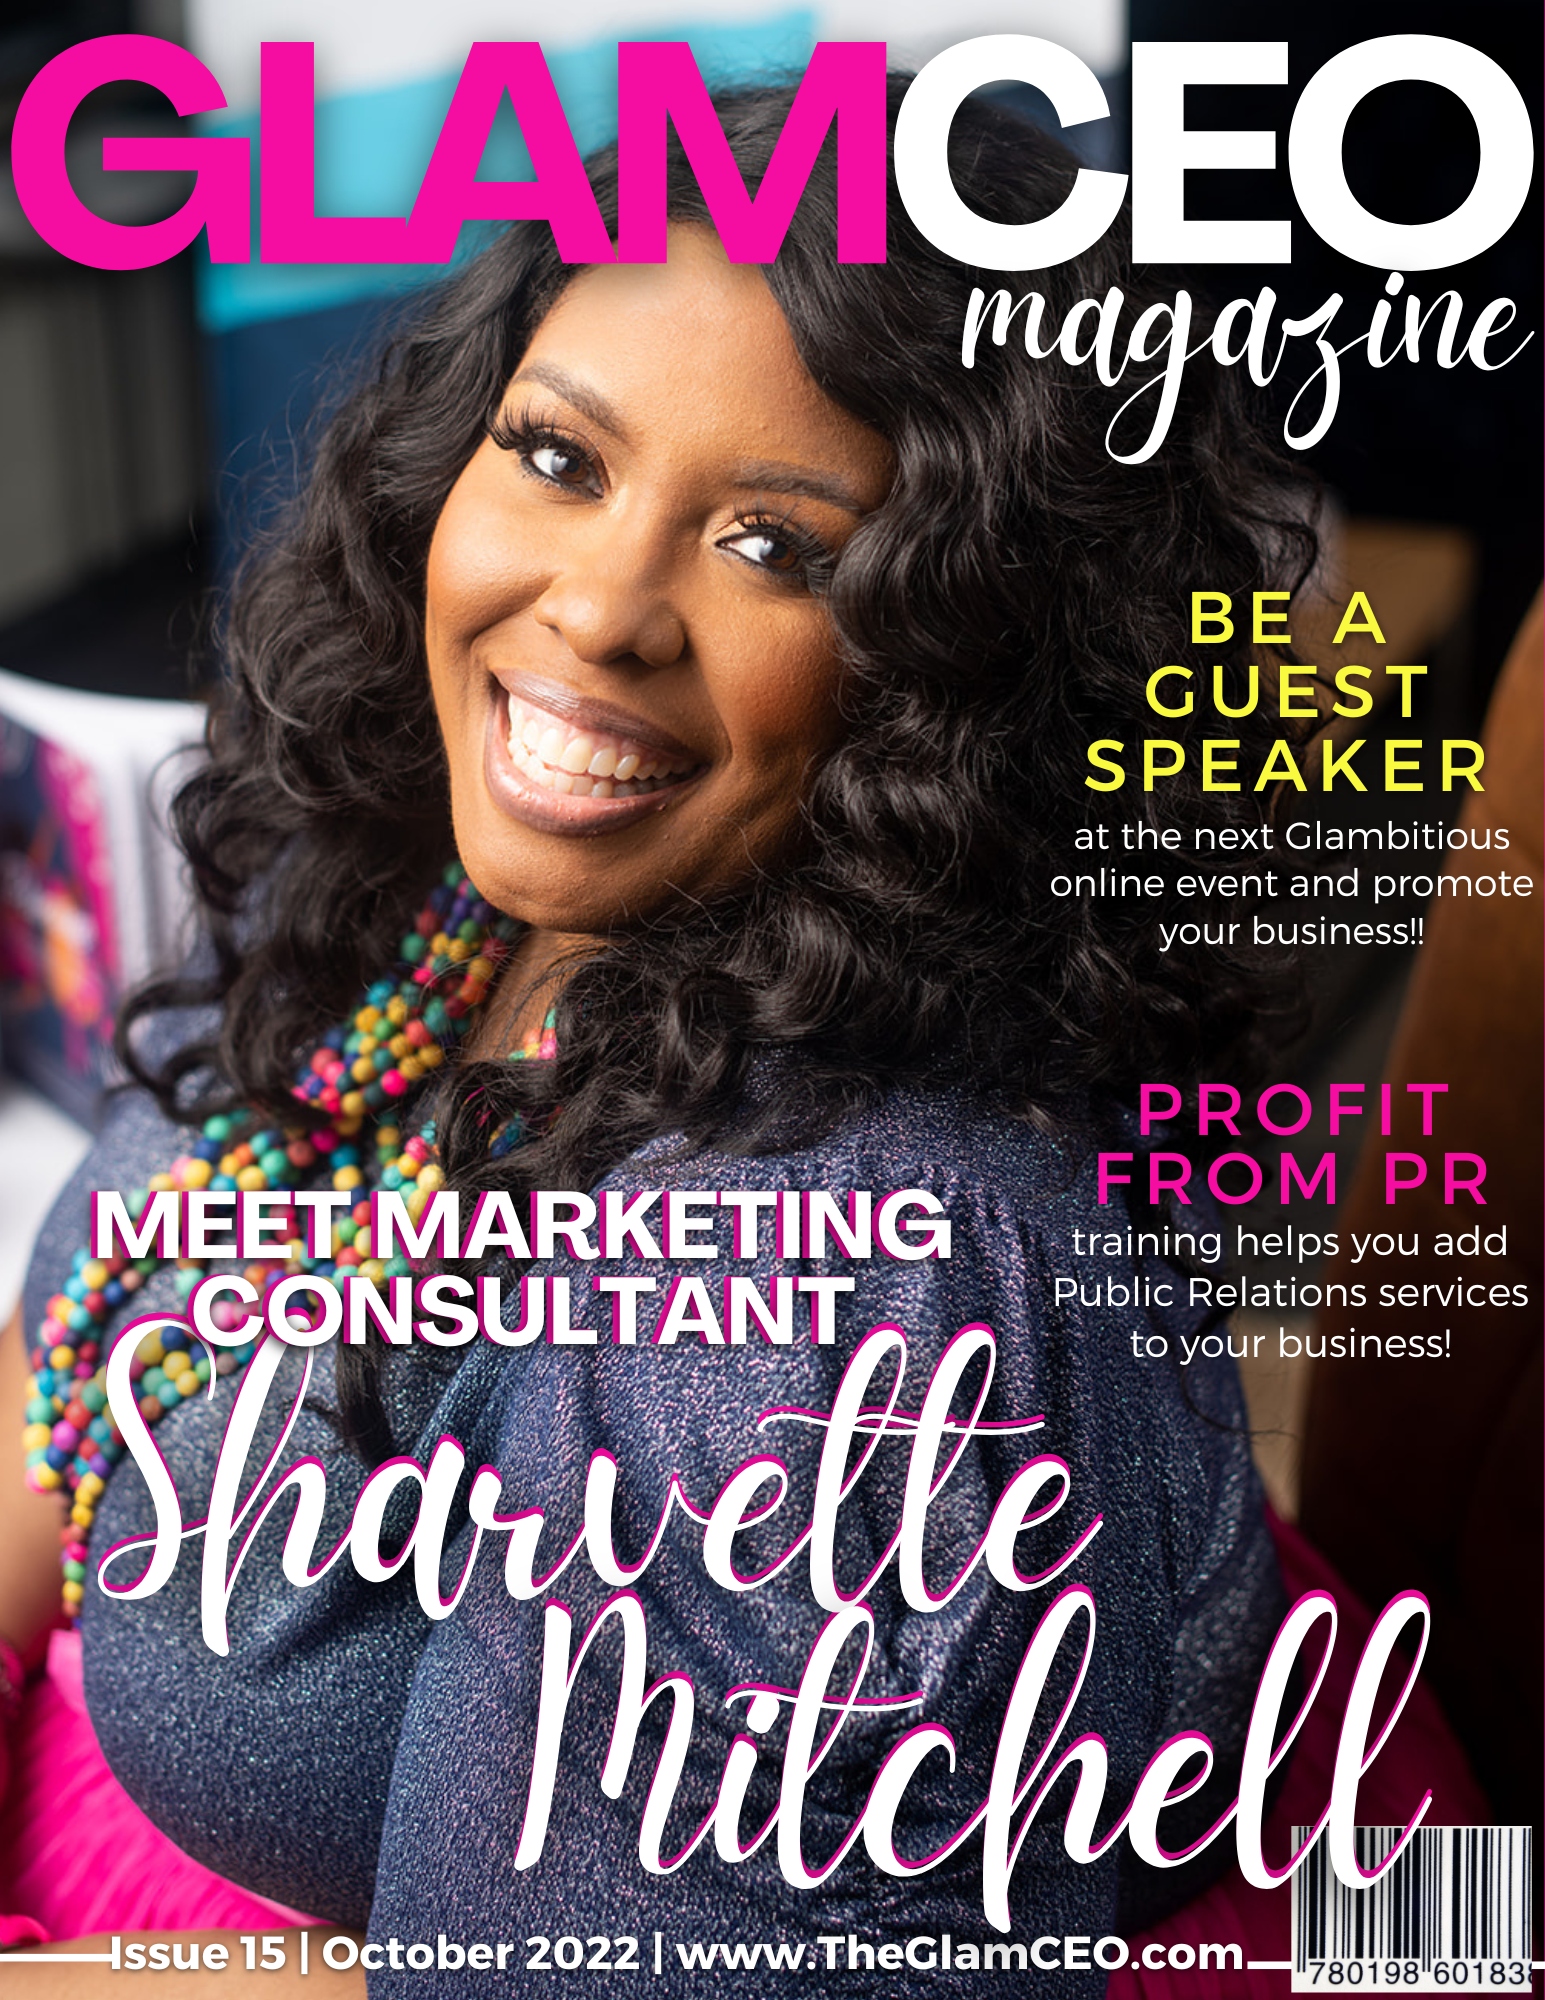 GlamCEO magazine feature